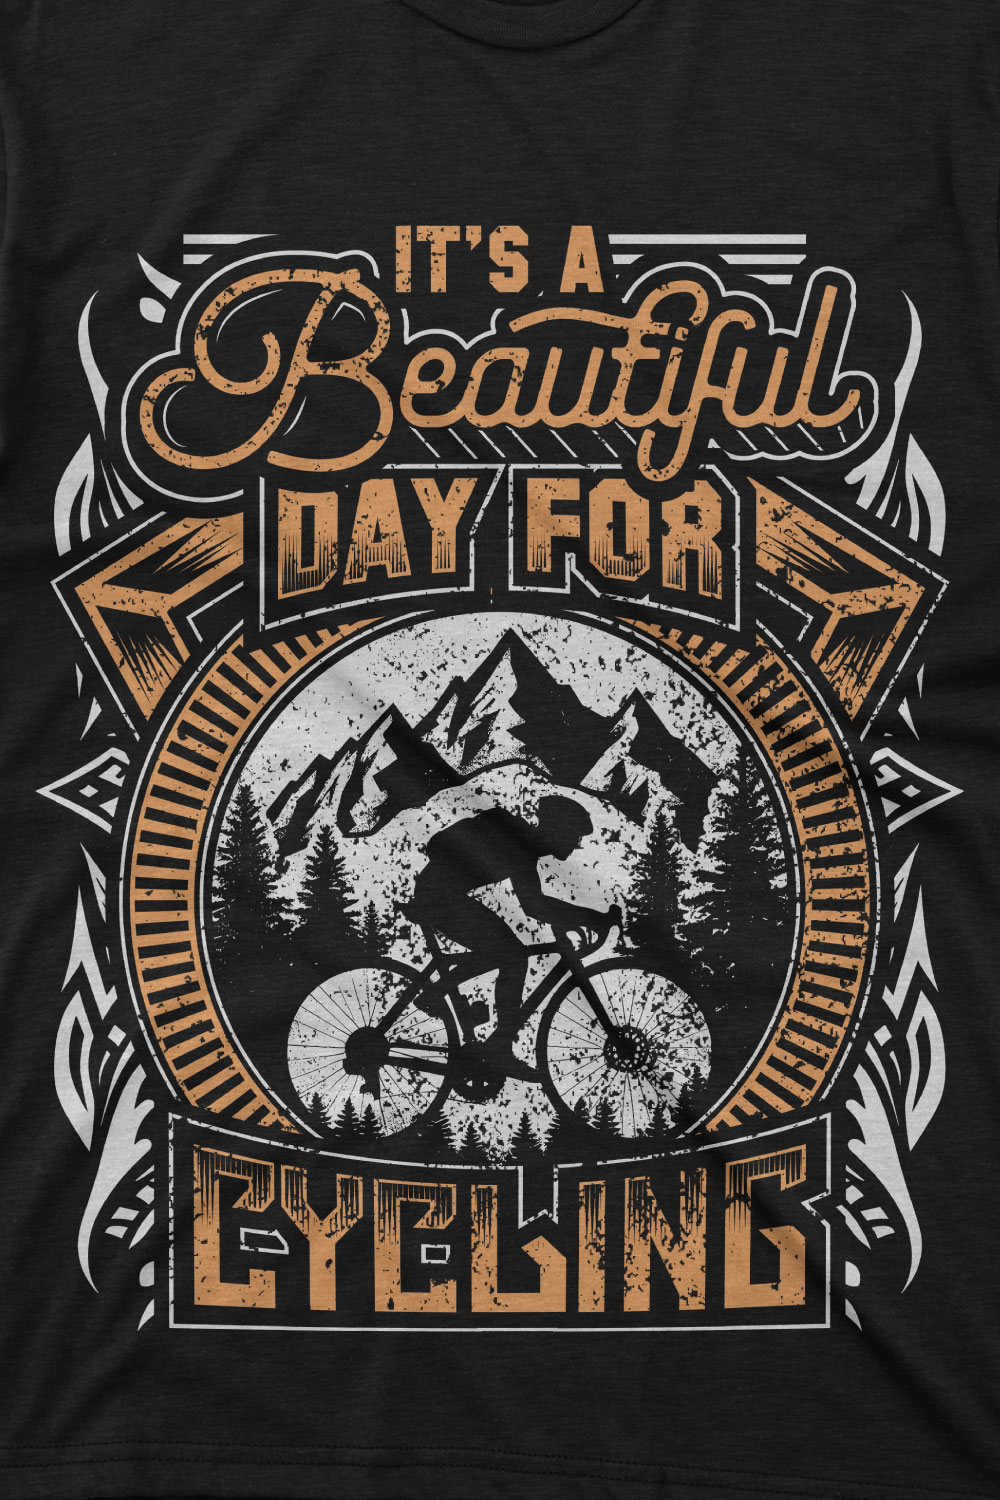 IT’S A BEAUTIFUL DAY FOR CYCLING t shirt design, cycling t shirt design pinterest preview image.